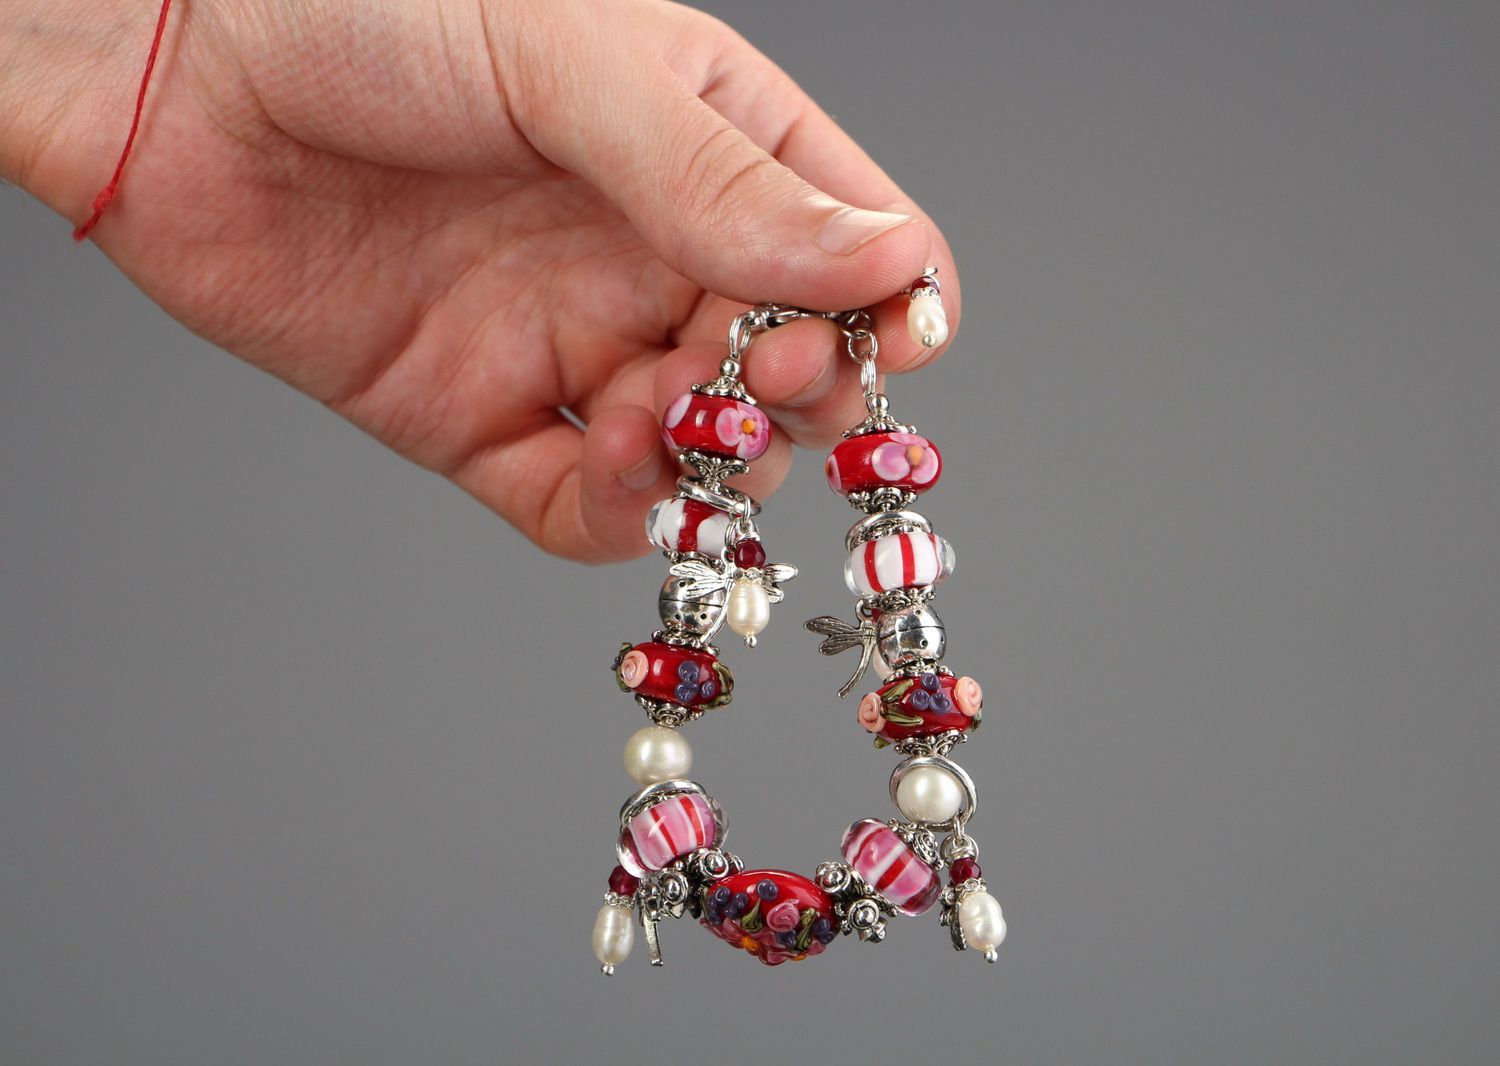 Bracelet made from glass and pearls photo 5